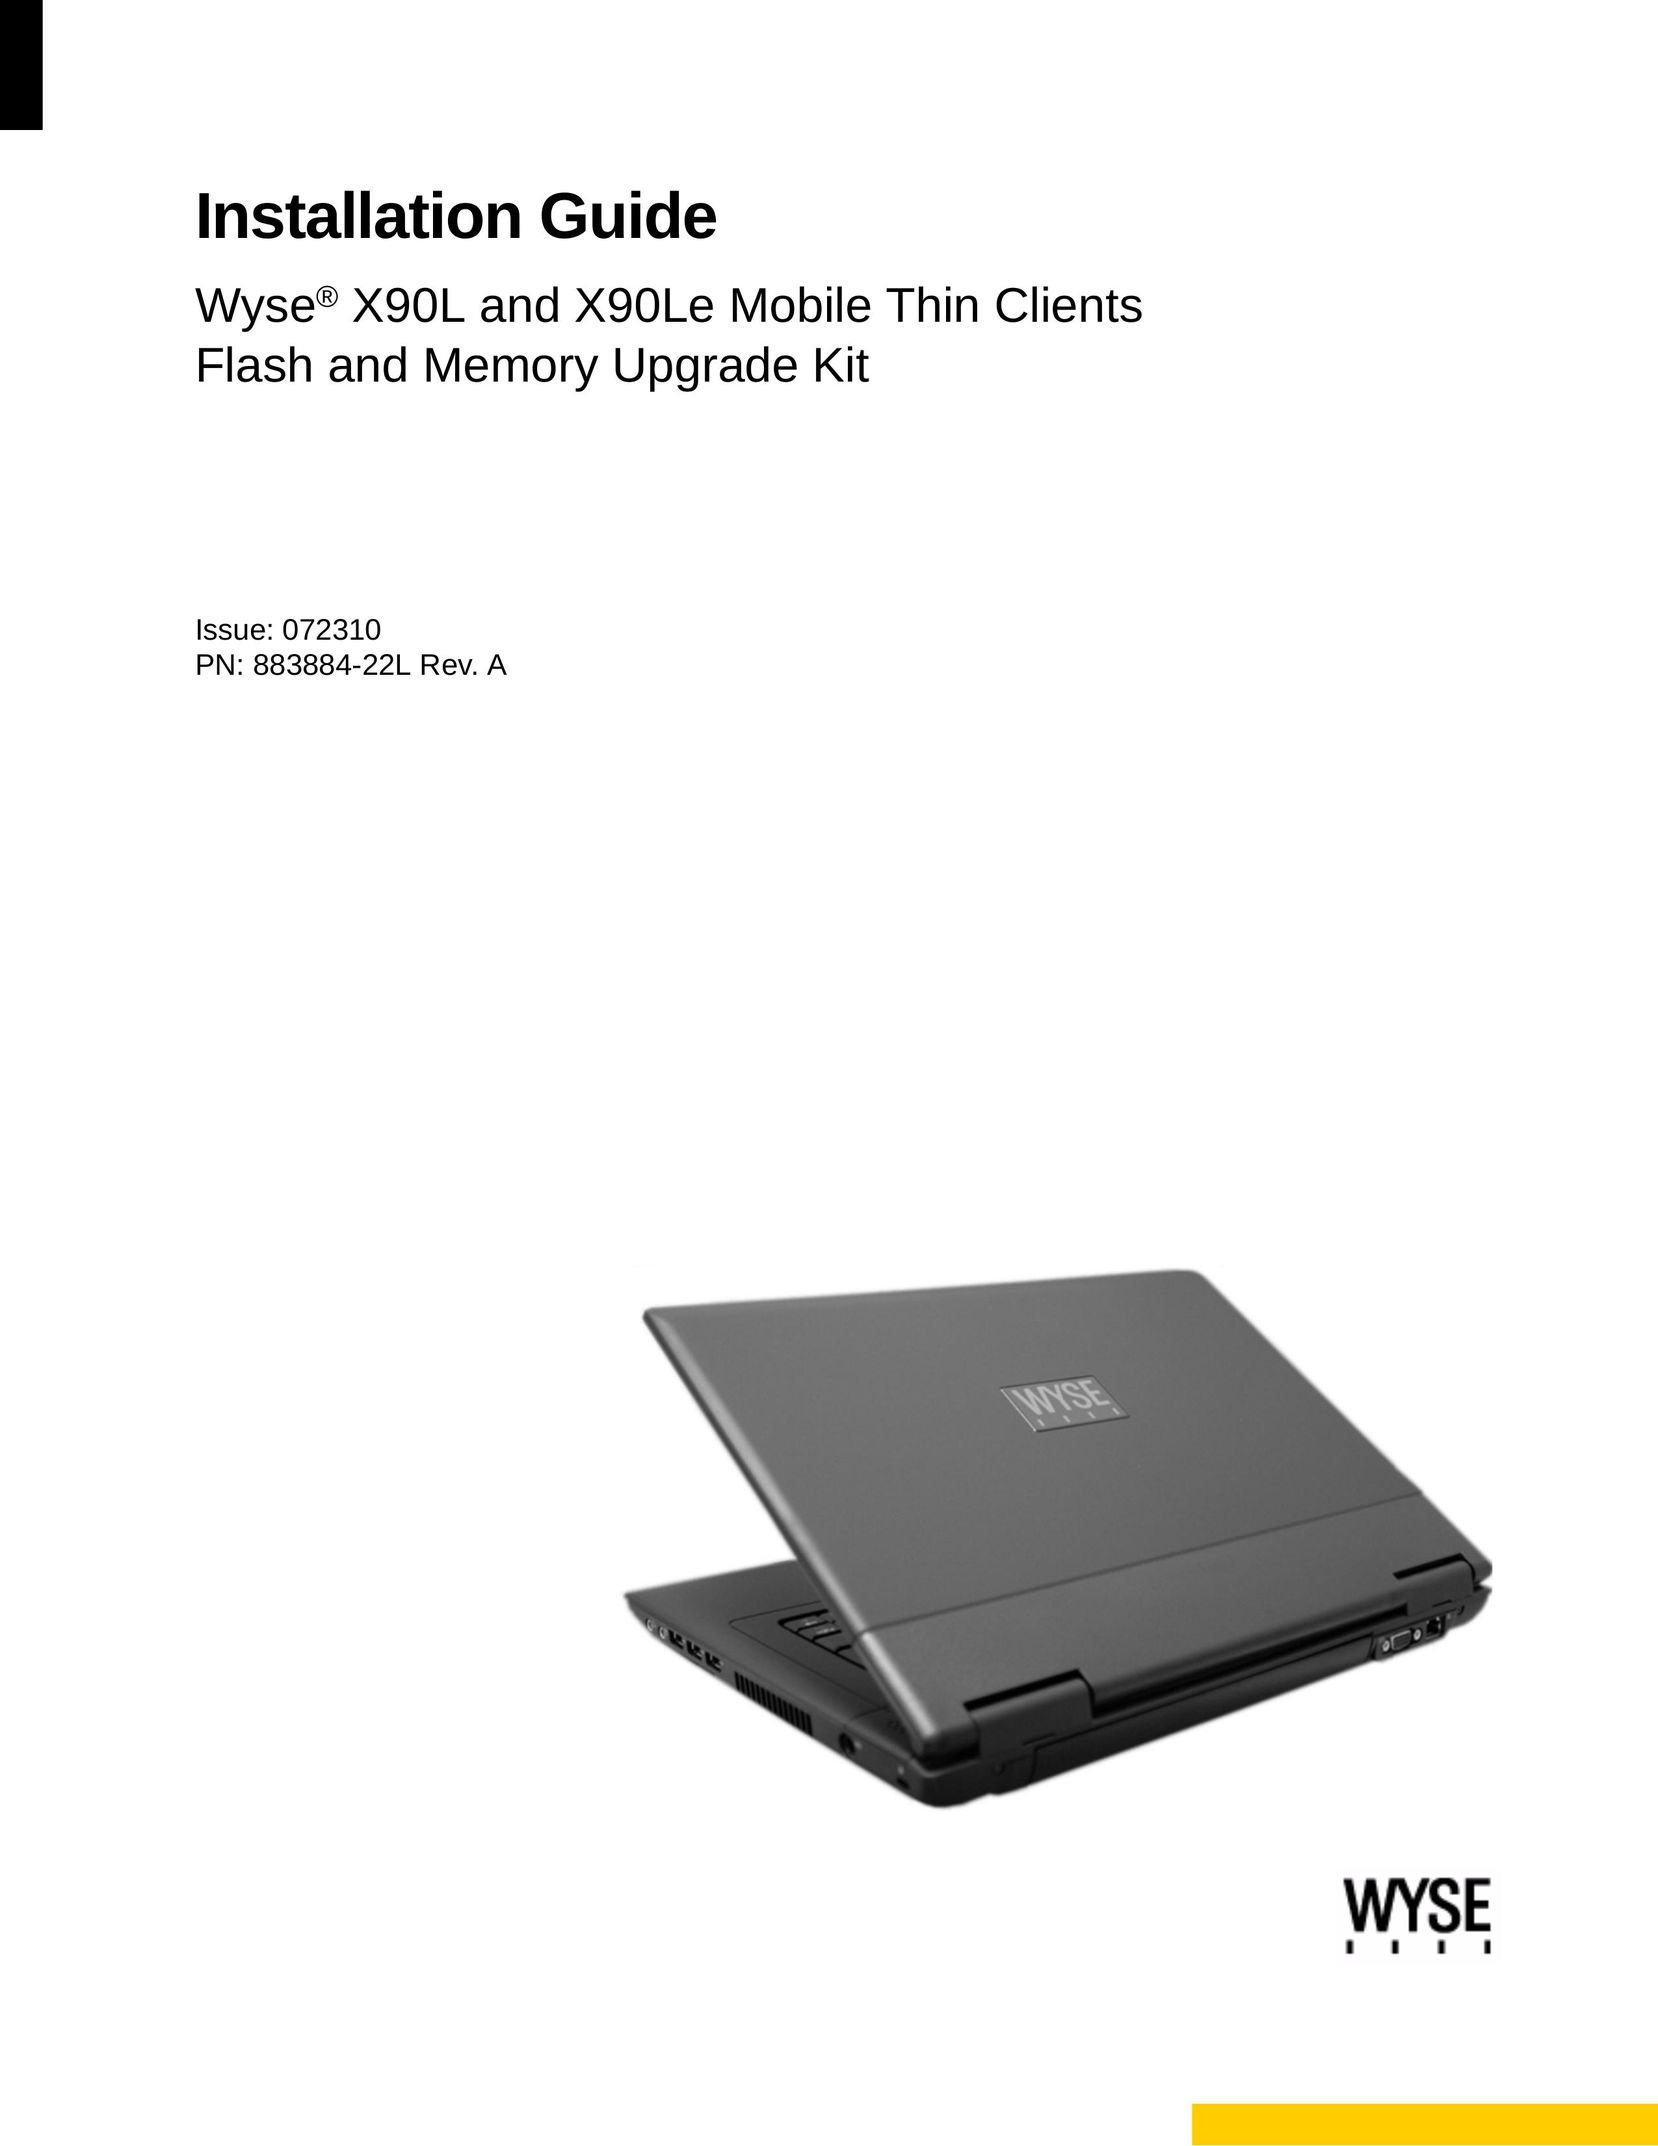 Wyse Technology X90LE Computer Drive User Manual